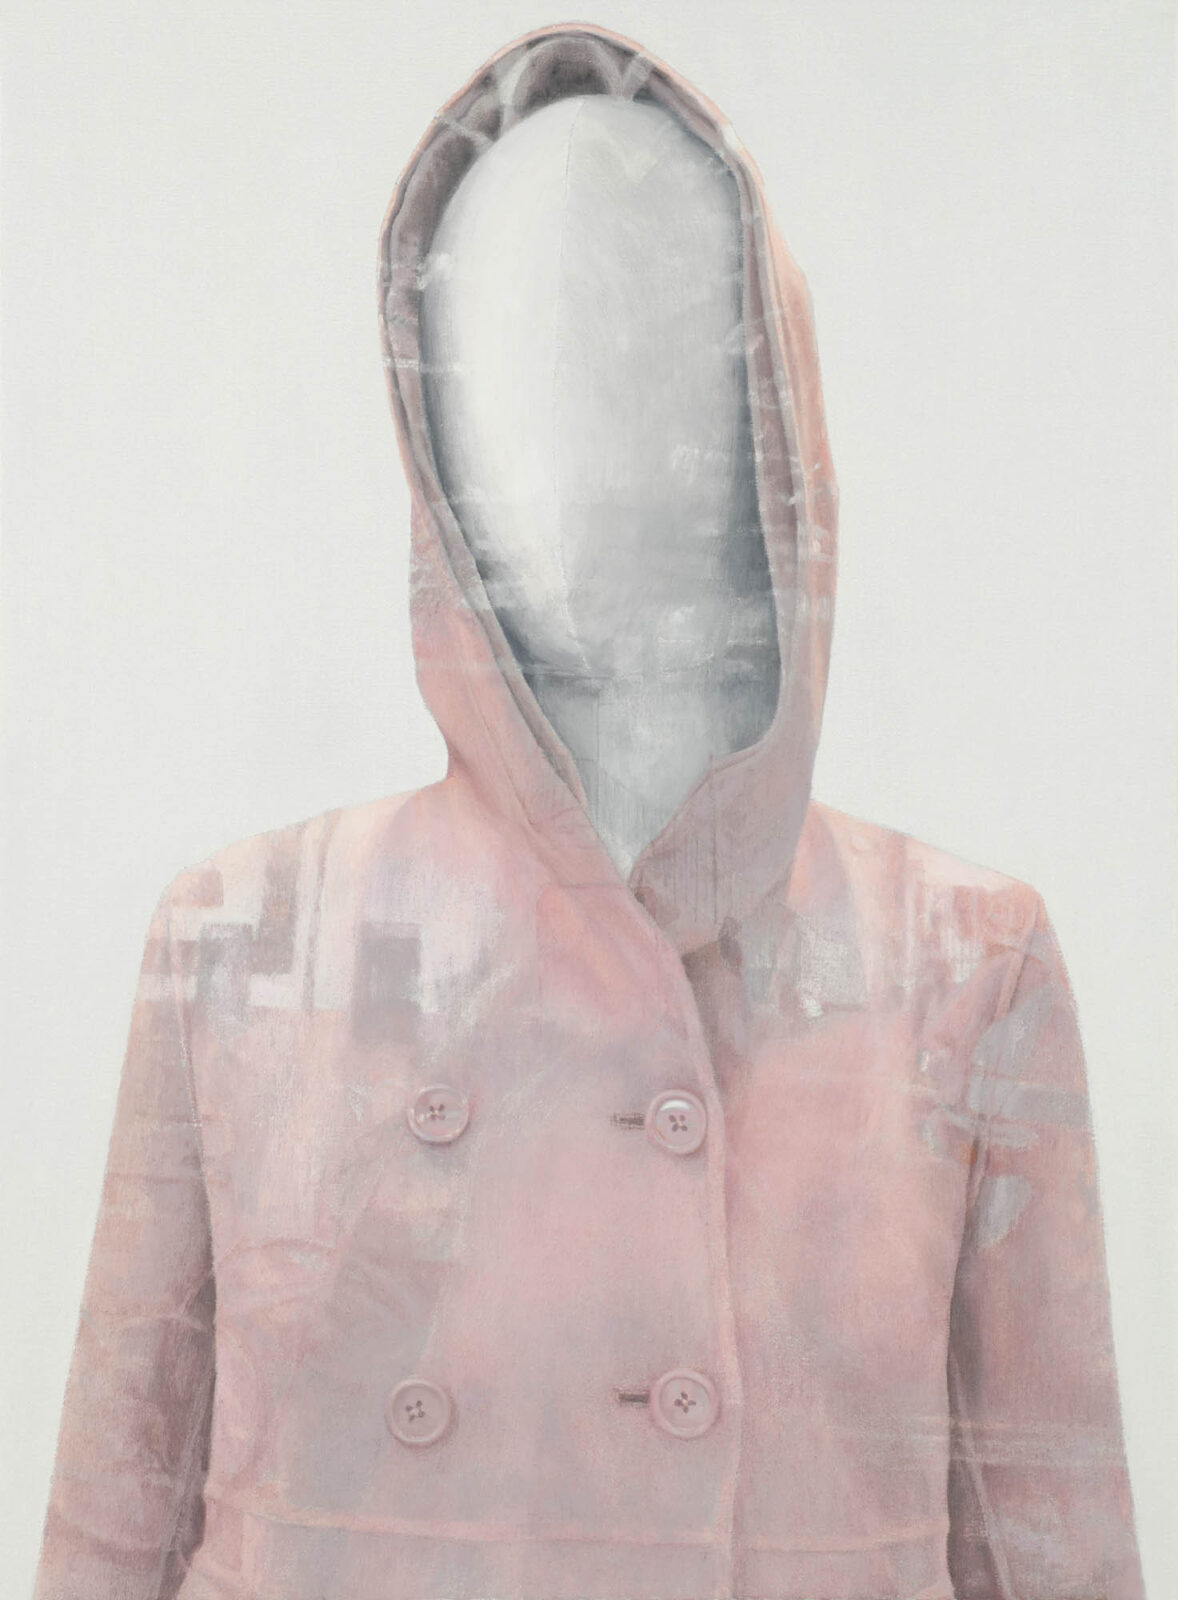 Liza Visagie - Latent Prototype #1. Oil on Linen 21 x 28 inches